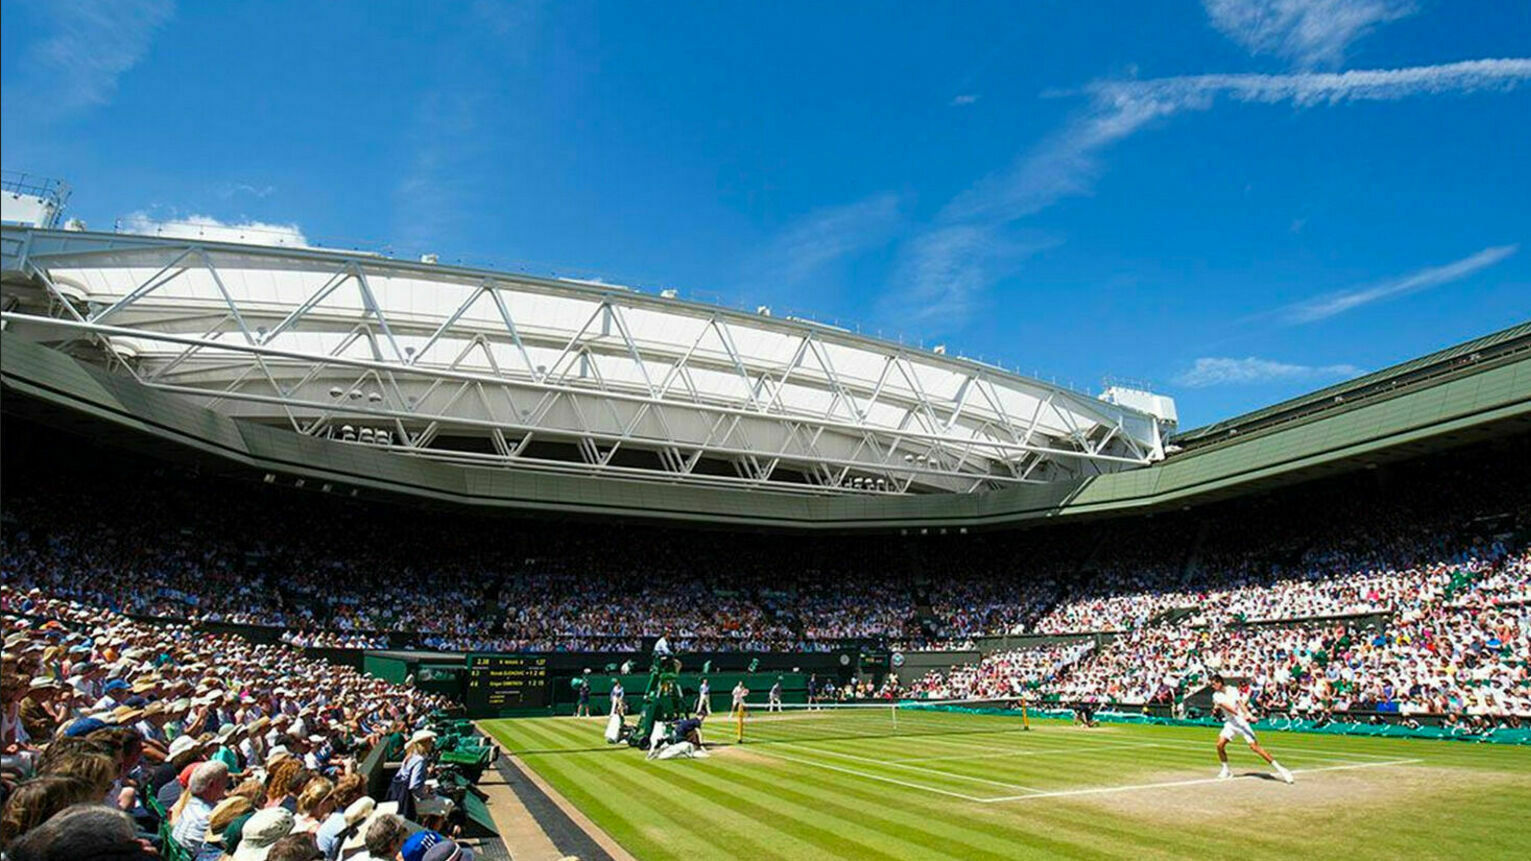 Russian and Belarusian tennis players are allowed to return to Wimbledon, but on a condition